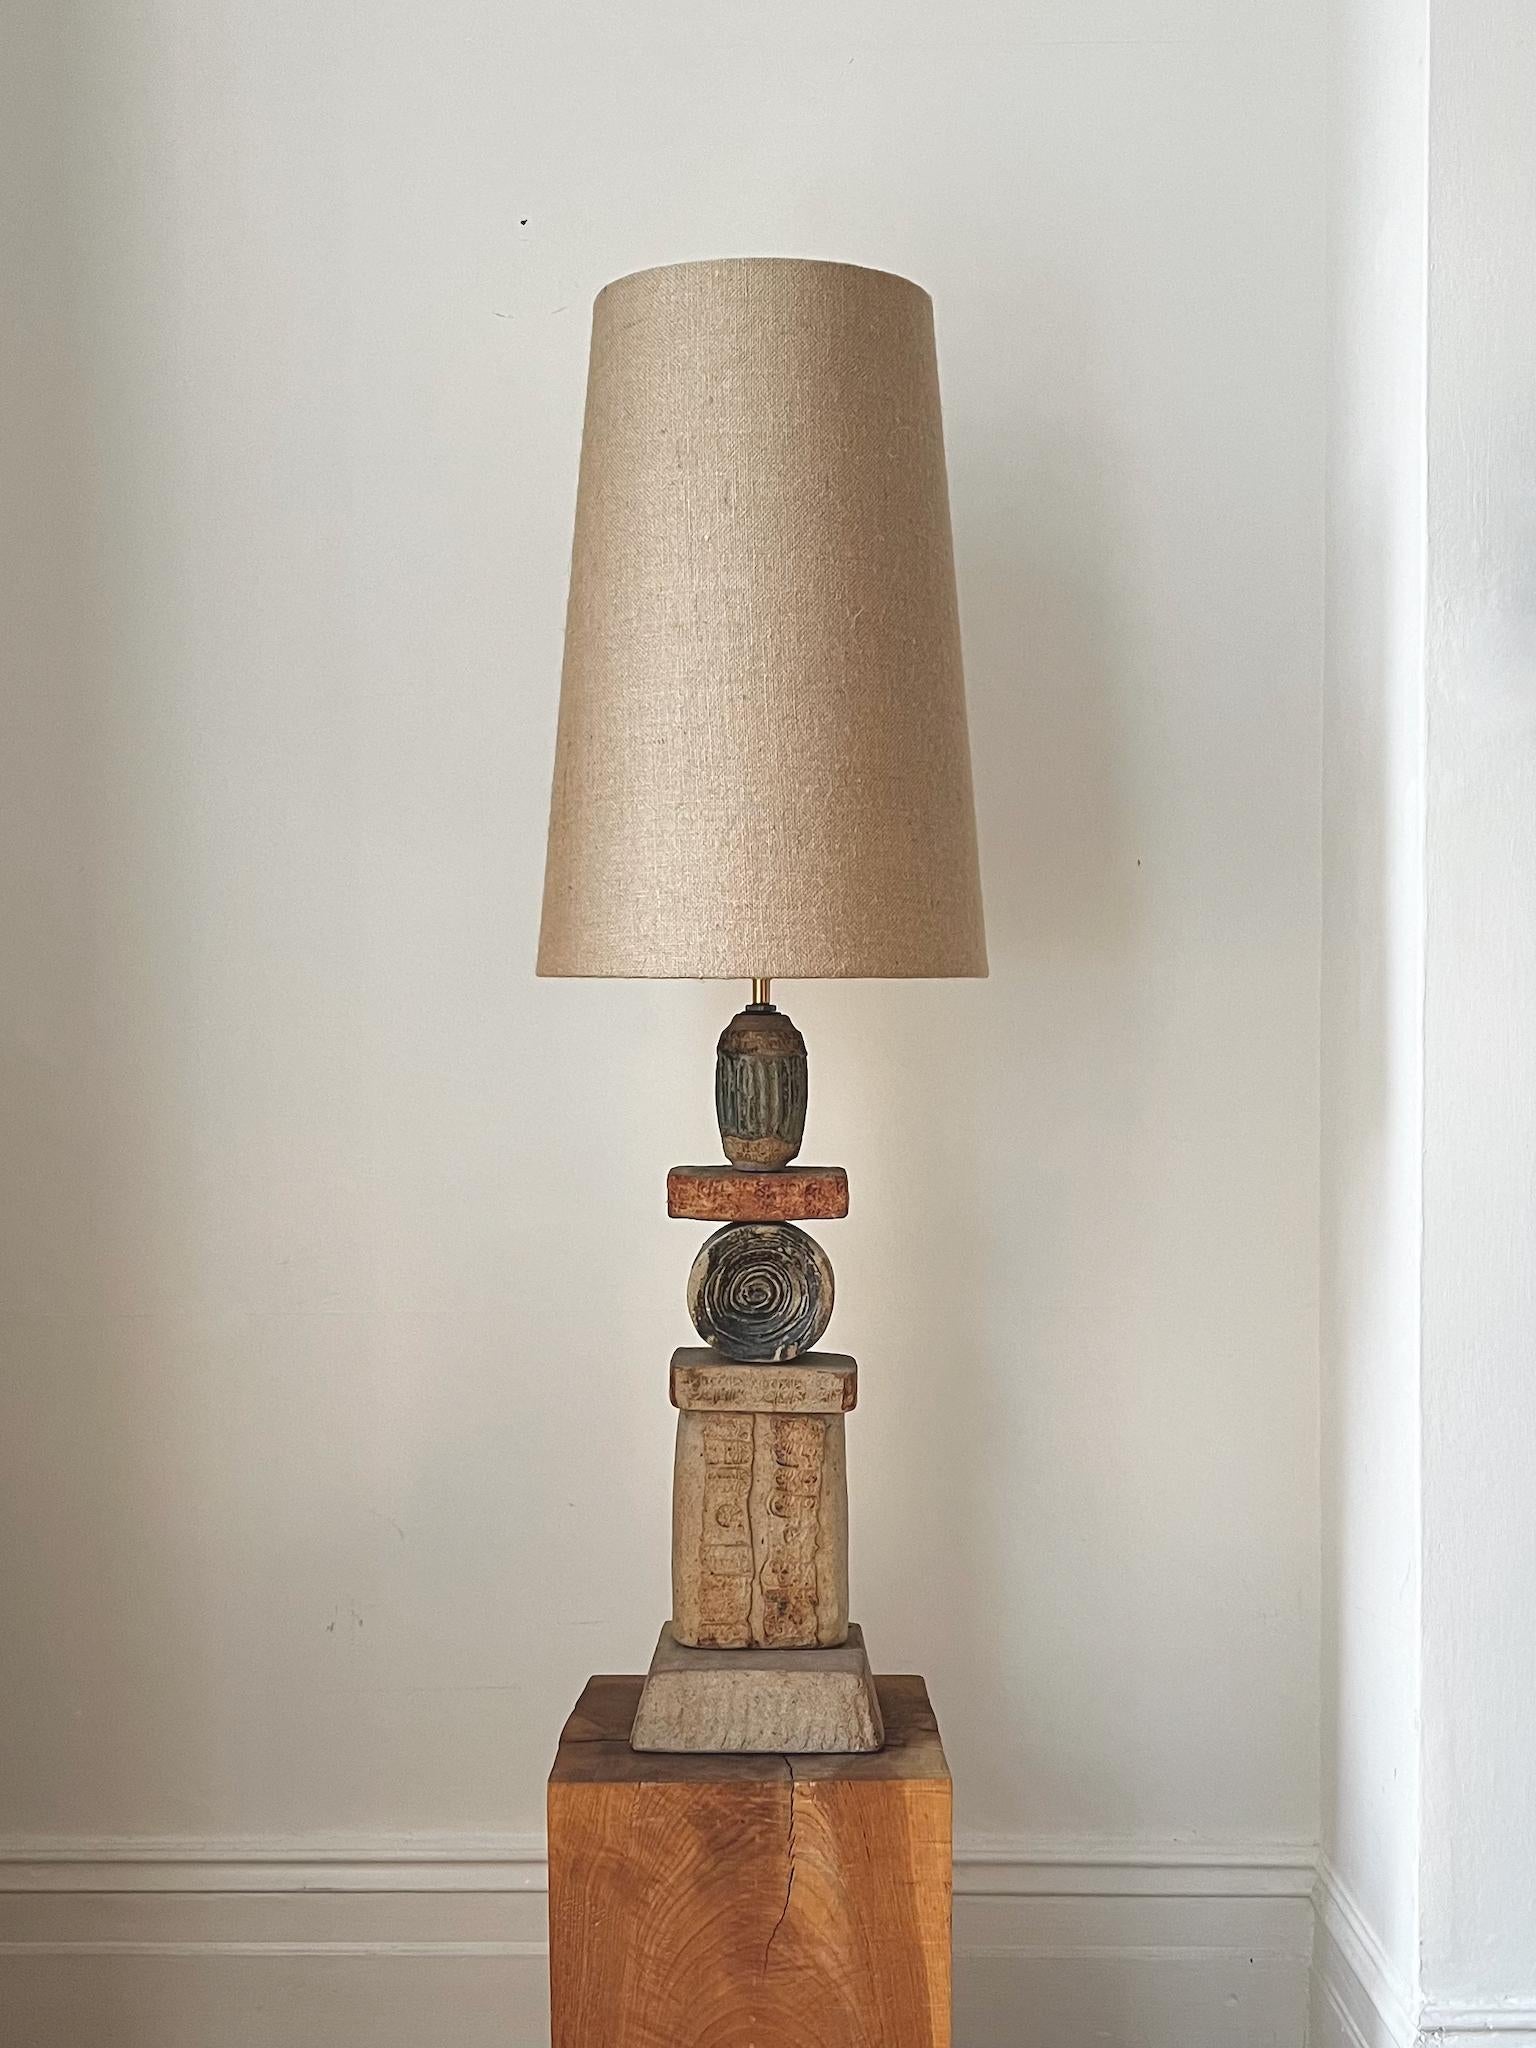 A large, or oversize, ceramic TOTEM table lamp by Bernard Rooke, England. 

This design is an early example of Rooke's work - probably 1960s - a sculptural piece in natural tones of terracotta and stone, with a combination of finishes. The lamp is